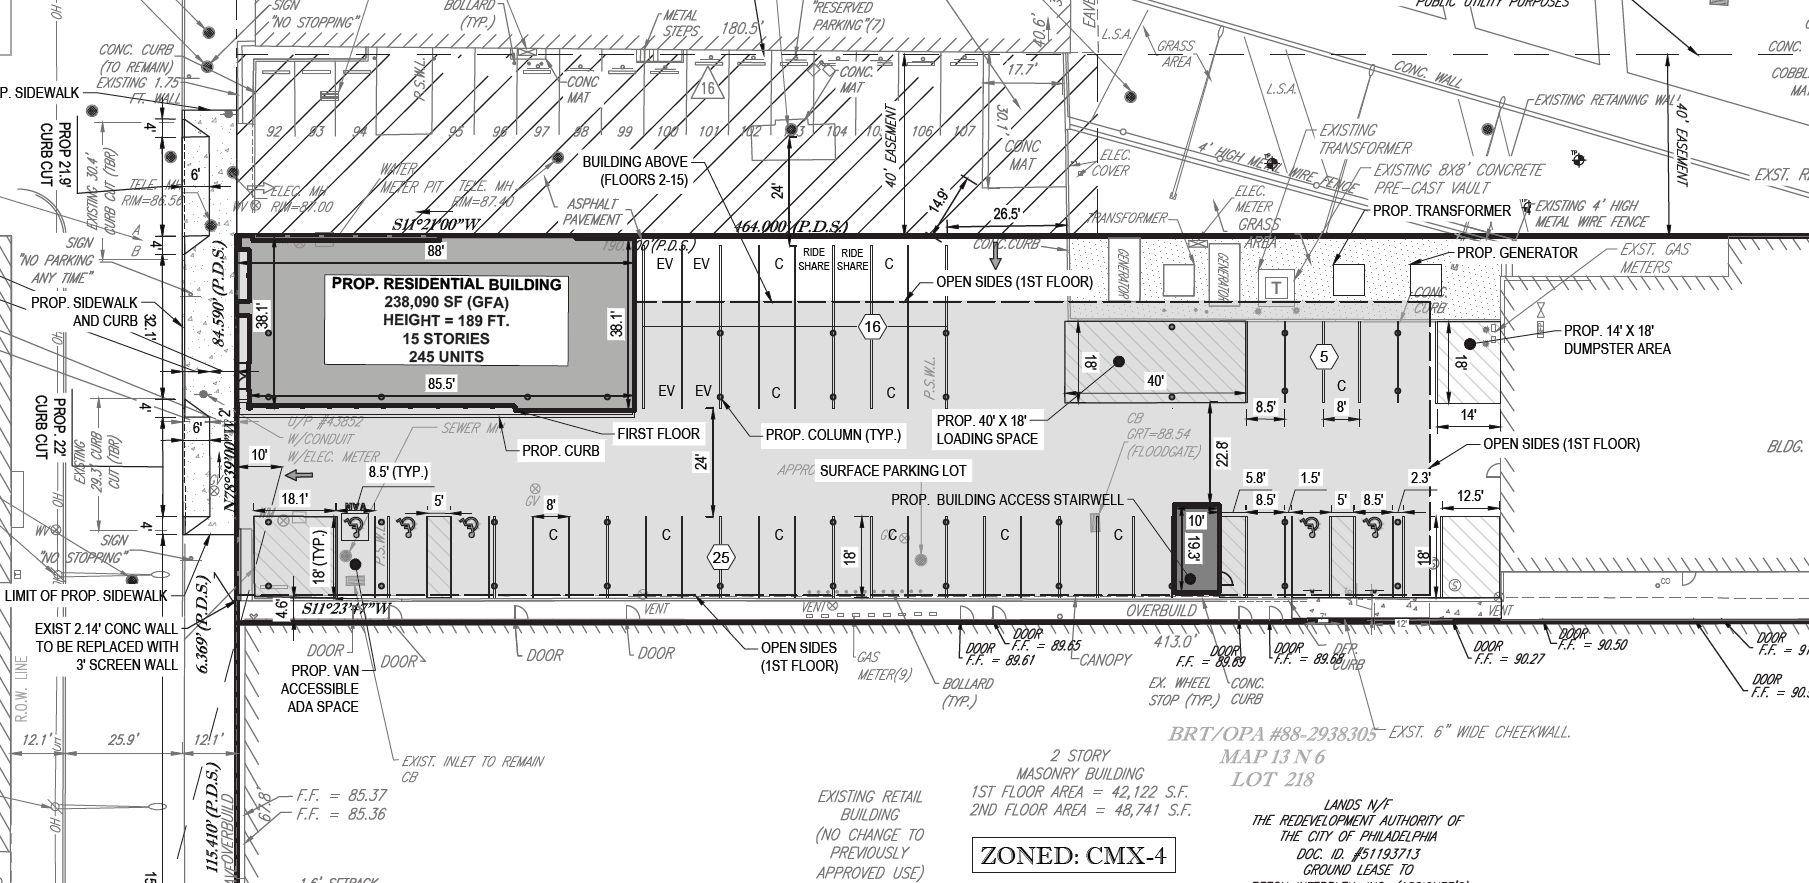 1600 North Broad Street (1406 Cecil B. Moore Avenue). Site plan. Credit: JKRP Architects via the Civic Design Review